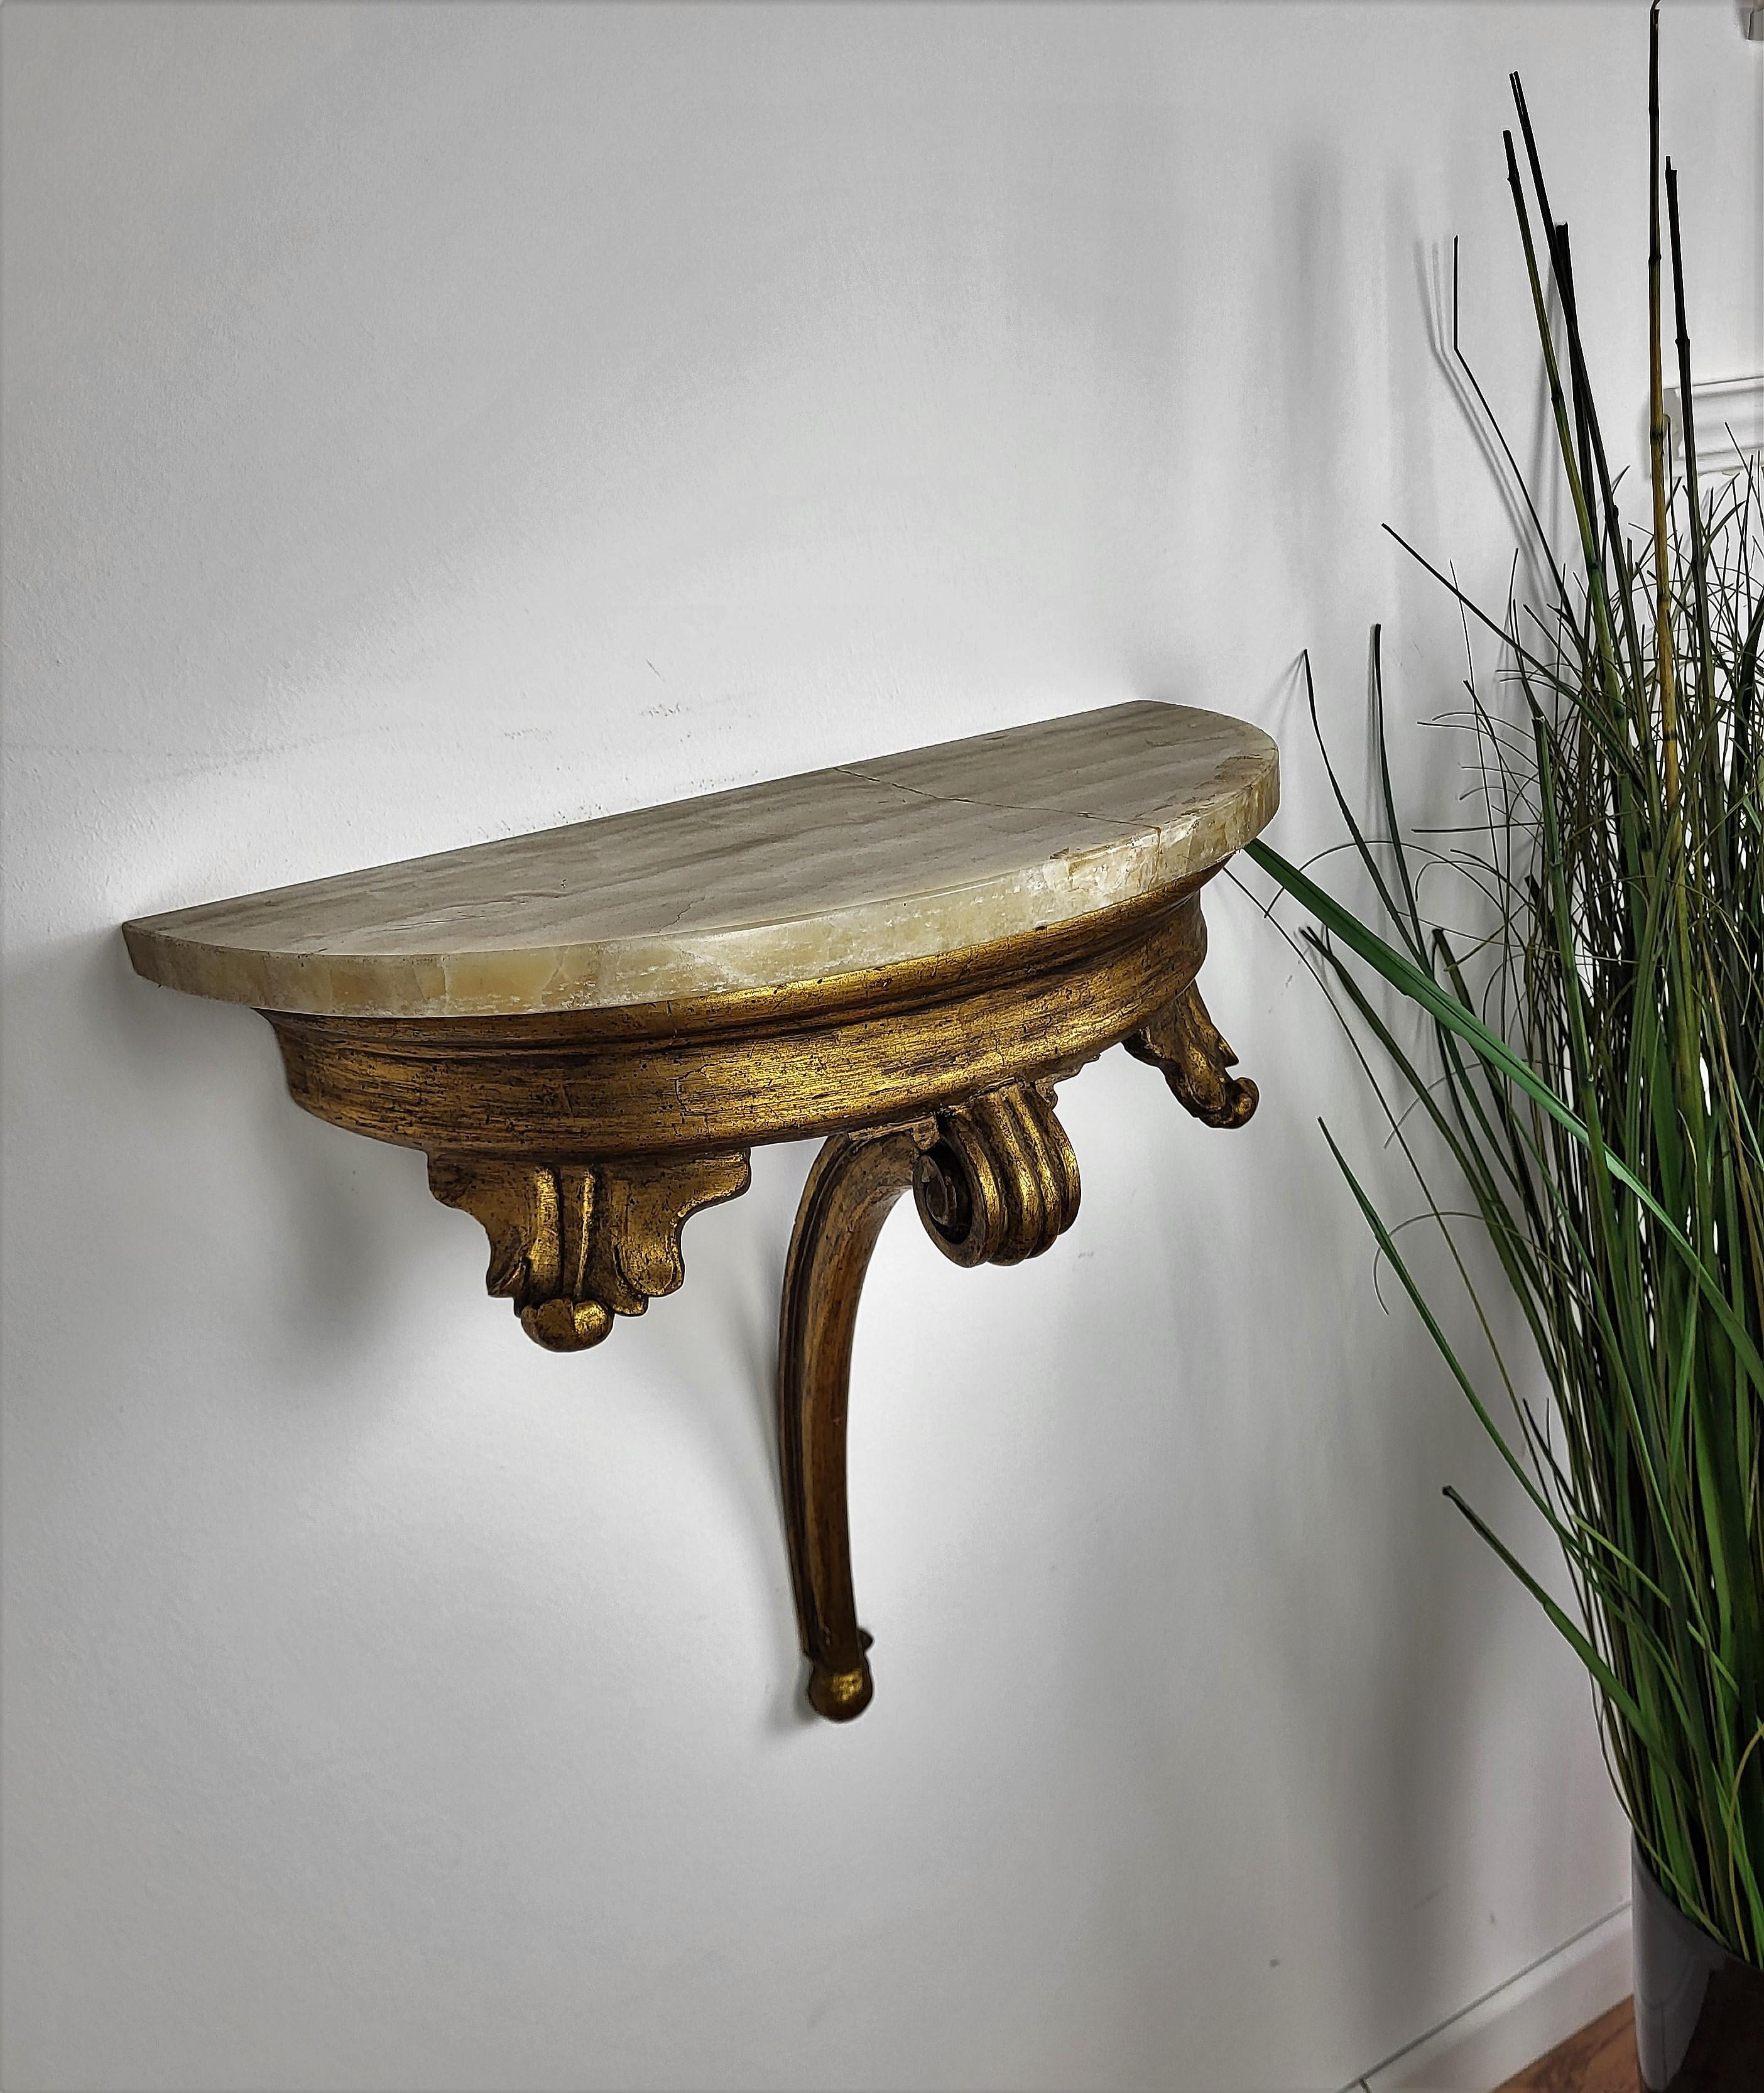 Beautiful pair of Baroque - Rococo style gilt wood demilune marble top wall mounted consoles. Ideal pieces for any interior both in Italian clasic style as well as contrast pieces in modern interiors, they can be used as consoles as well as night